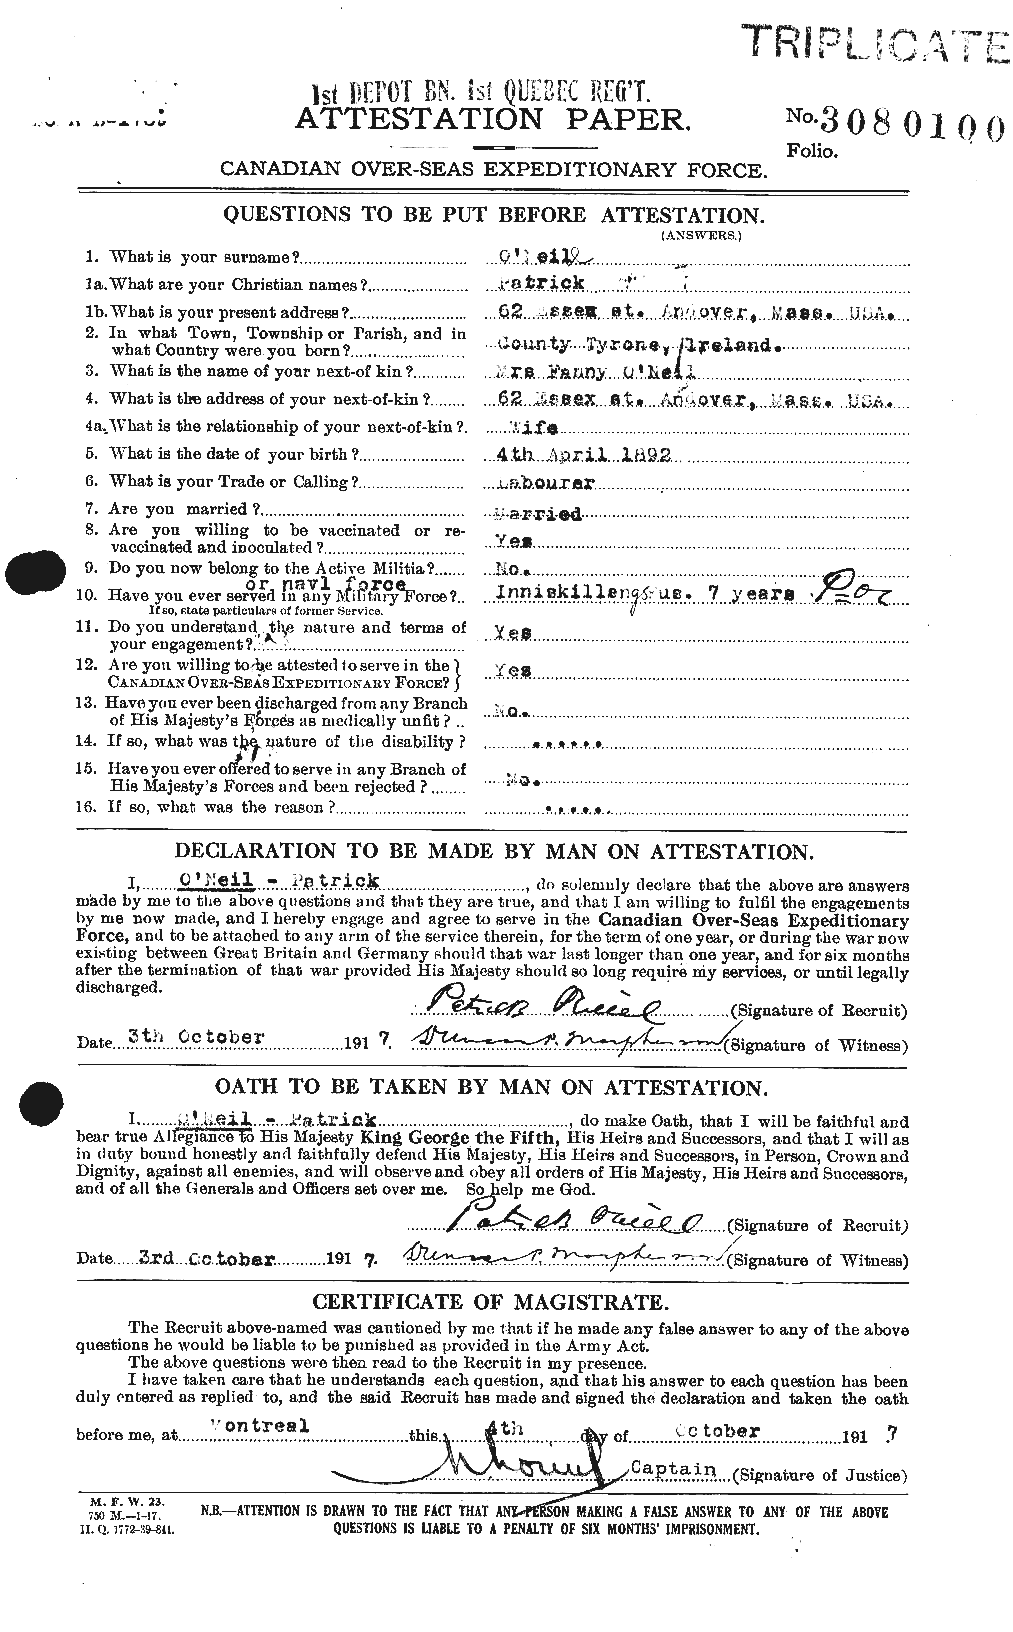 Personnel Records of the First World War - CEF 558078a